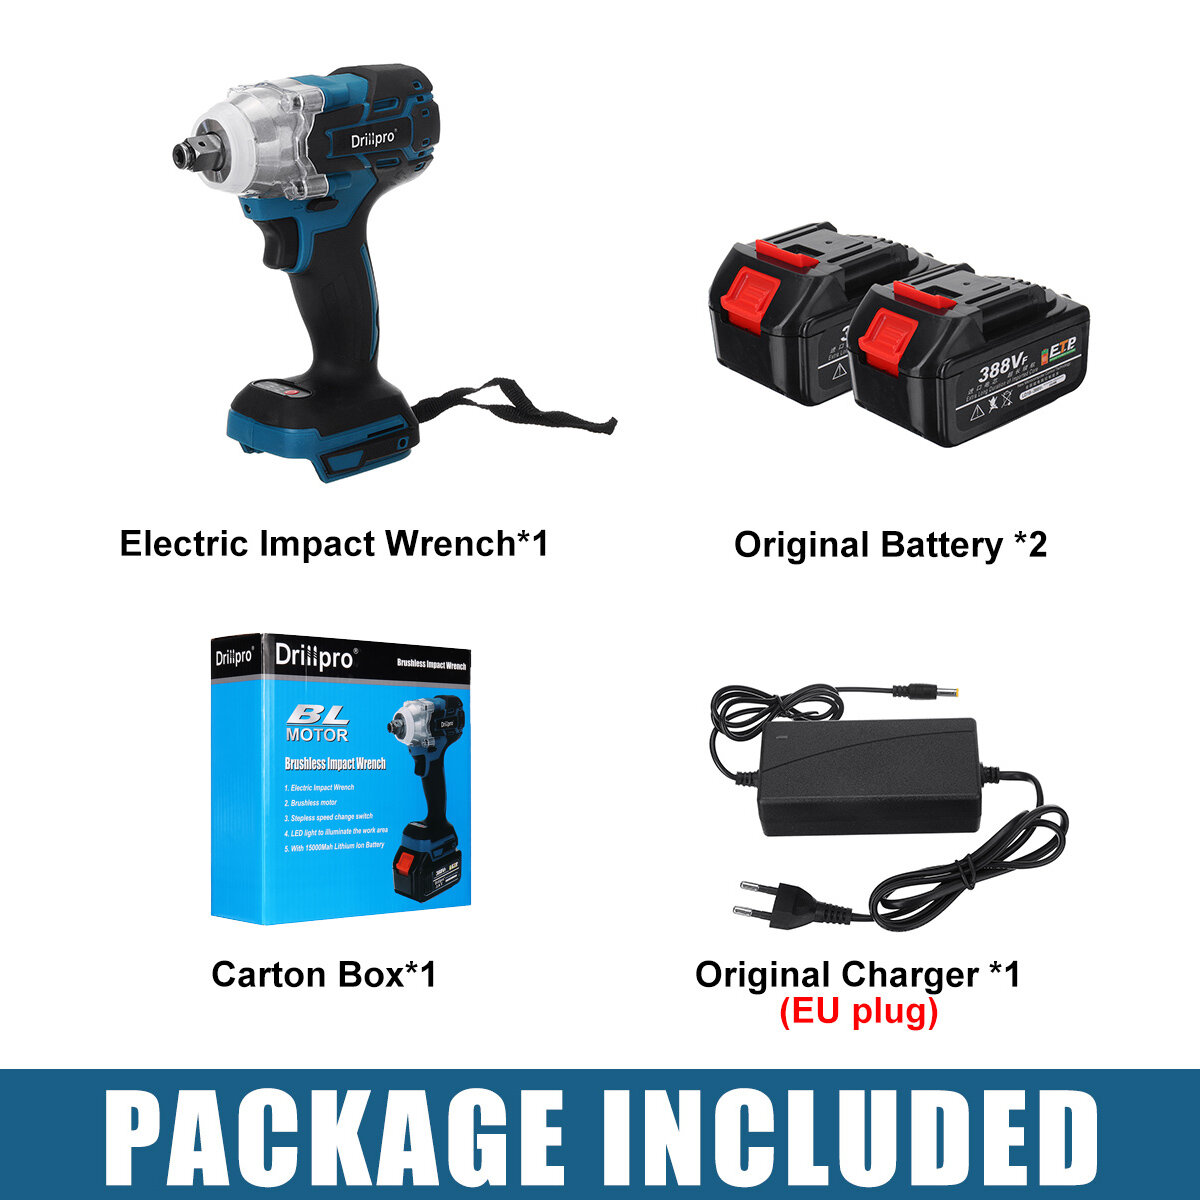 best price,520nm,388vf,brushless,impact,wrench,with,2,batteries,eu,coupon,price,discount